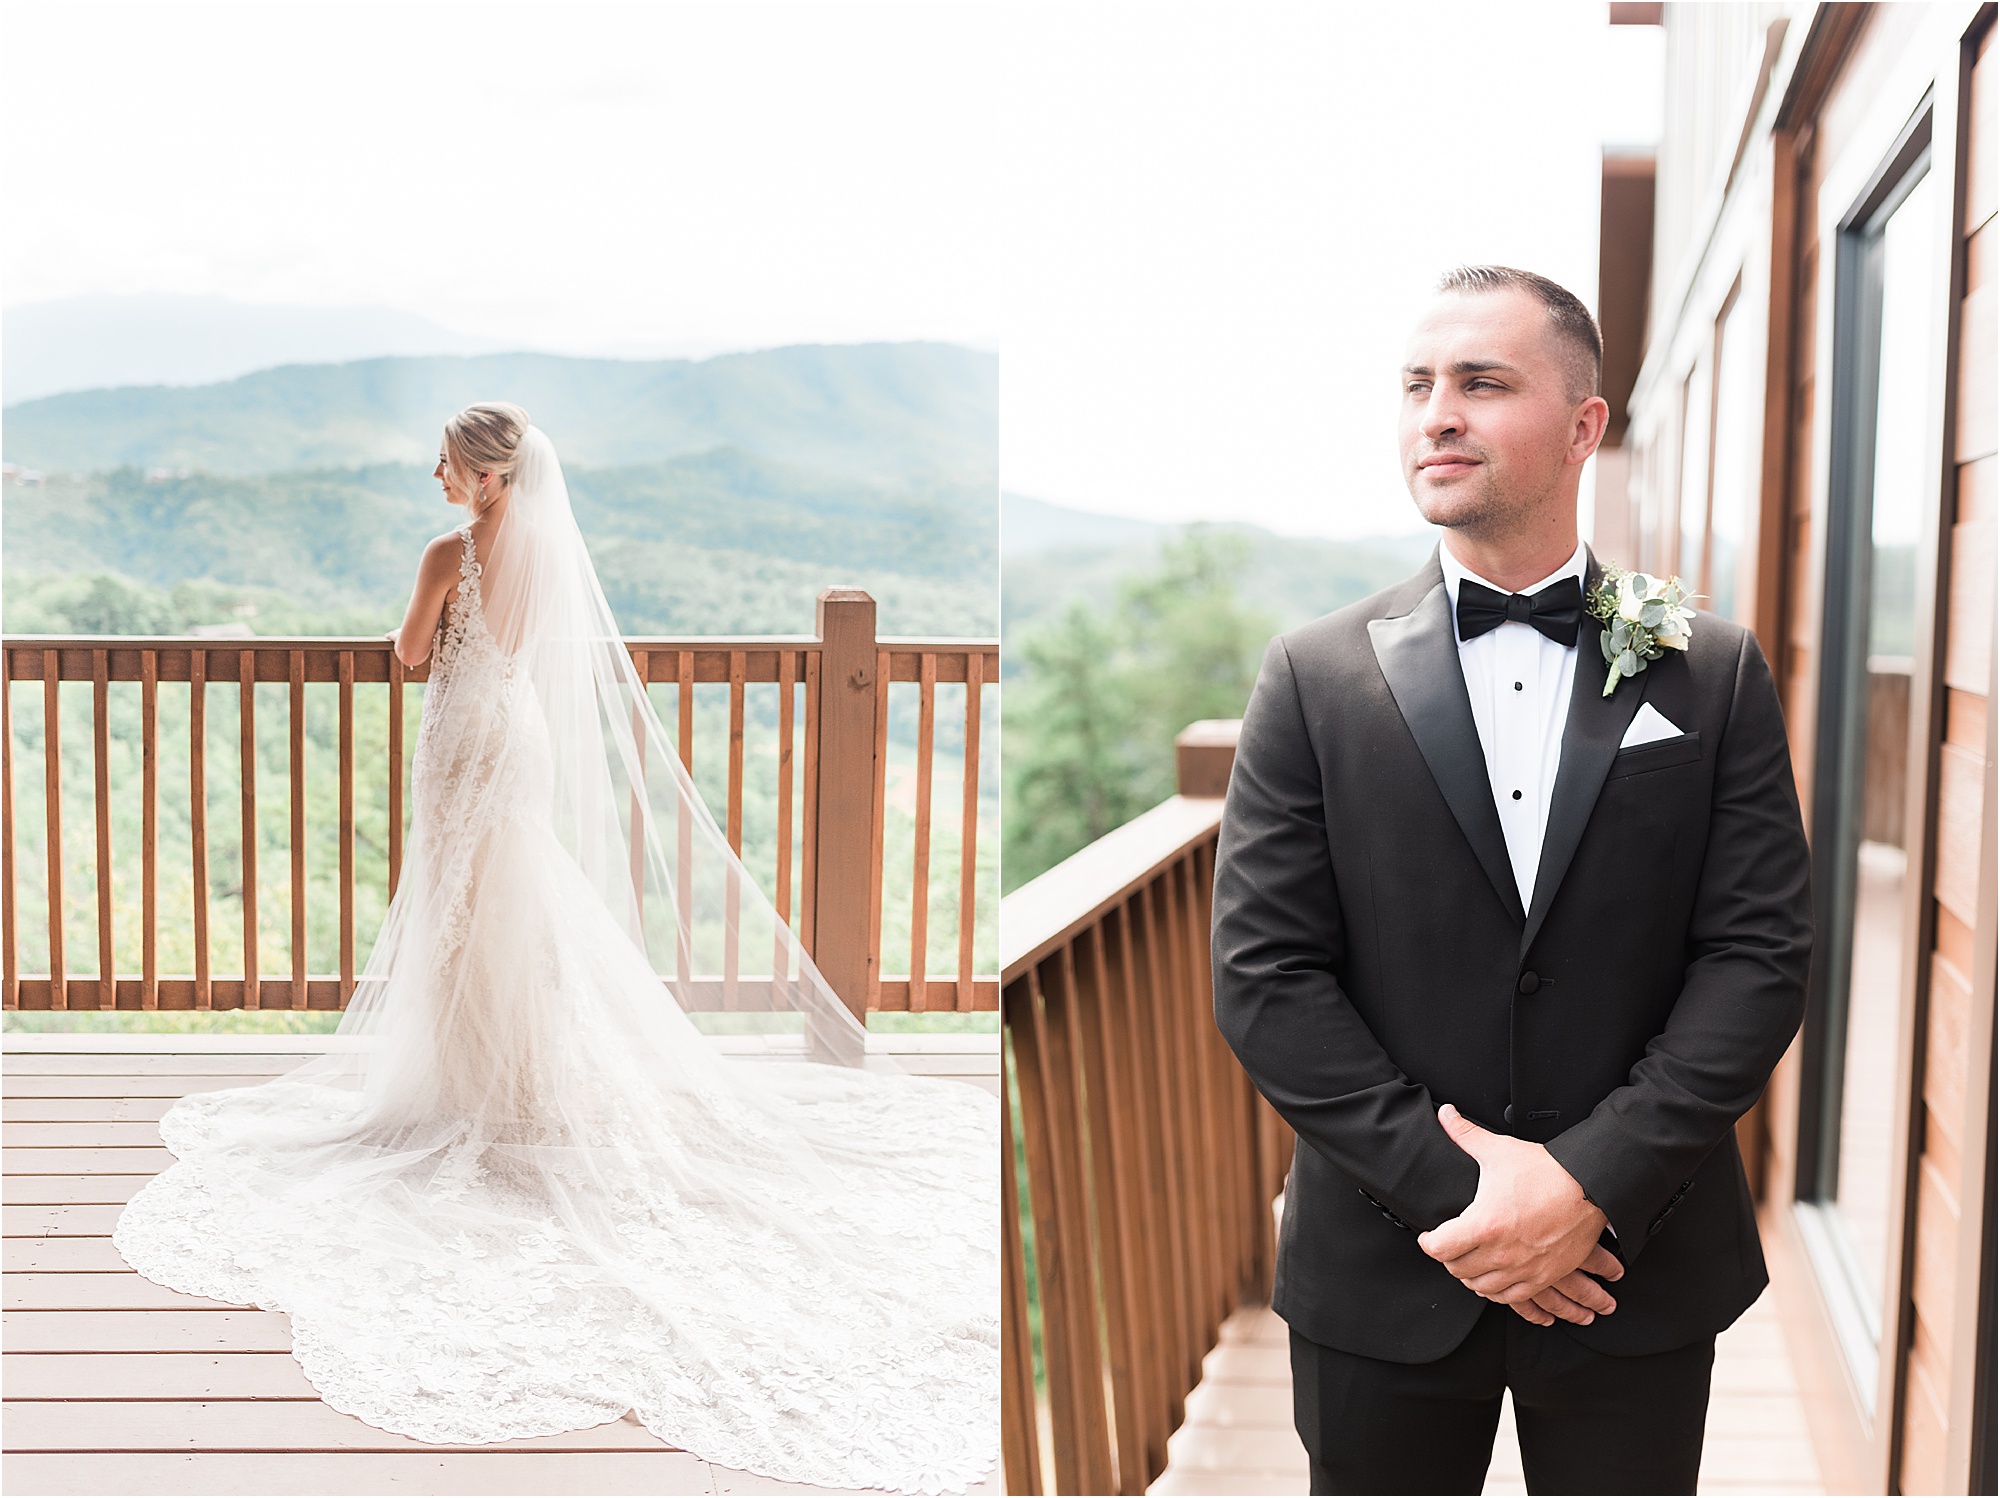 bride and groom portraits at mountain wedding venue